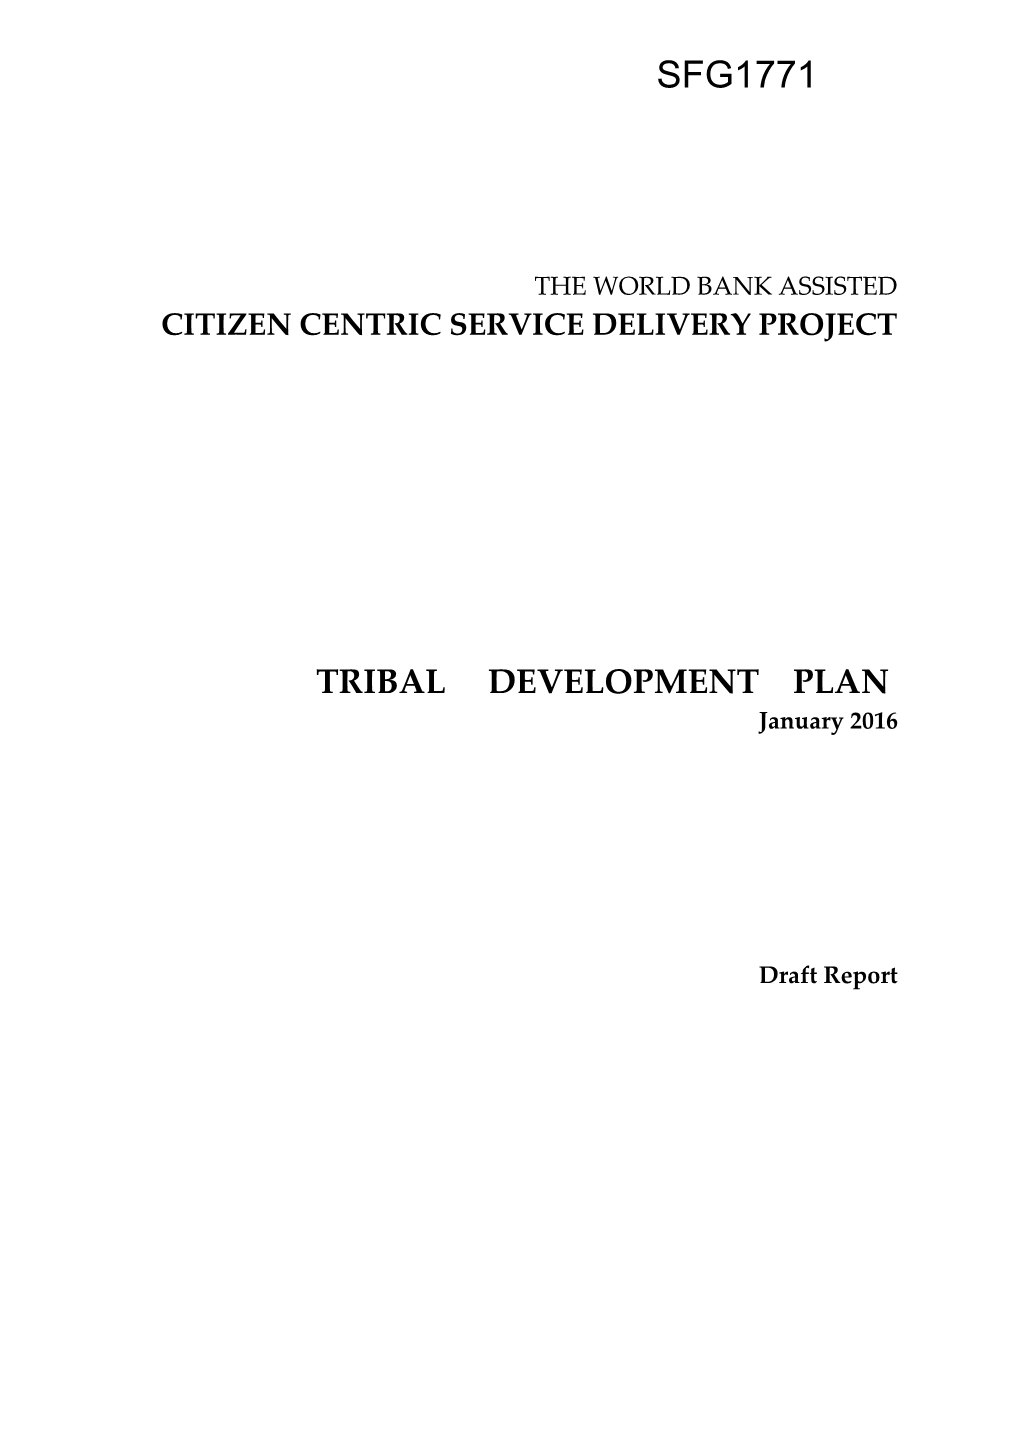 Citizen Centric Service Delivery Project